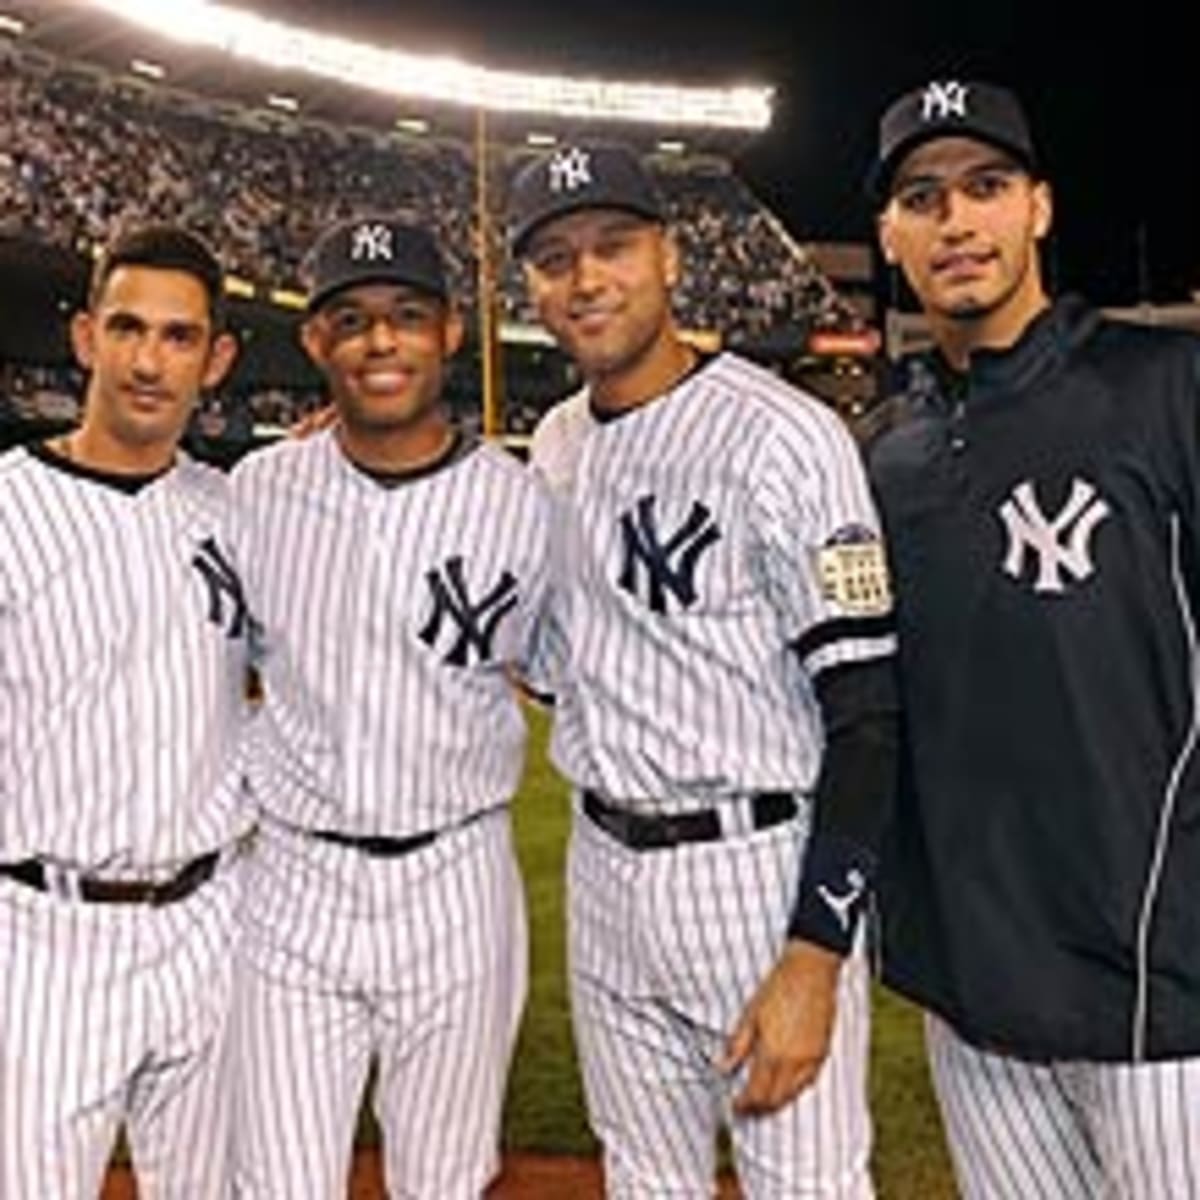 core four yankees